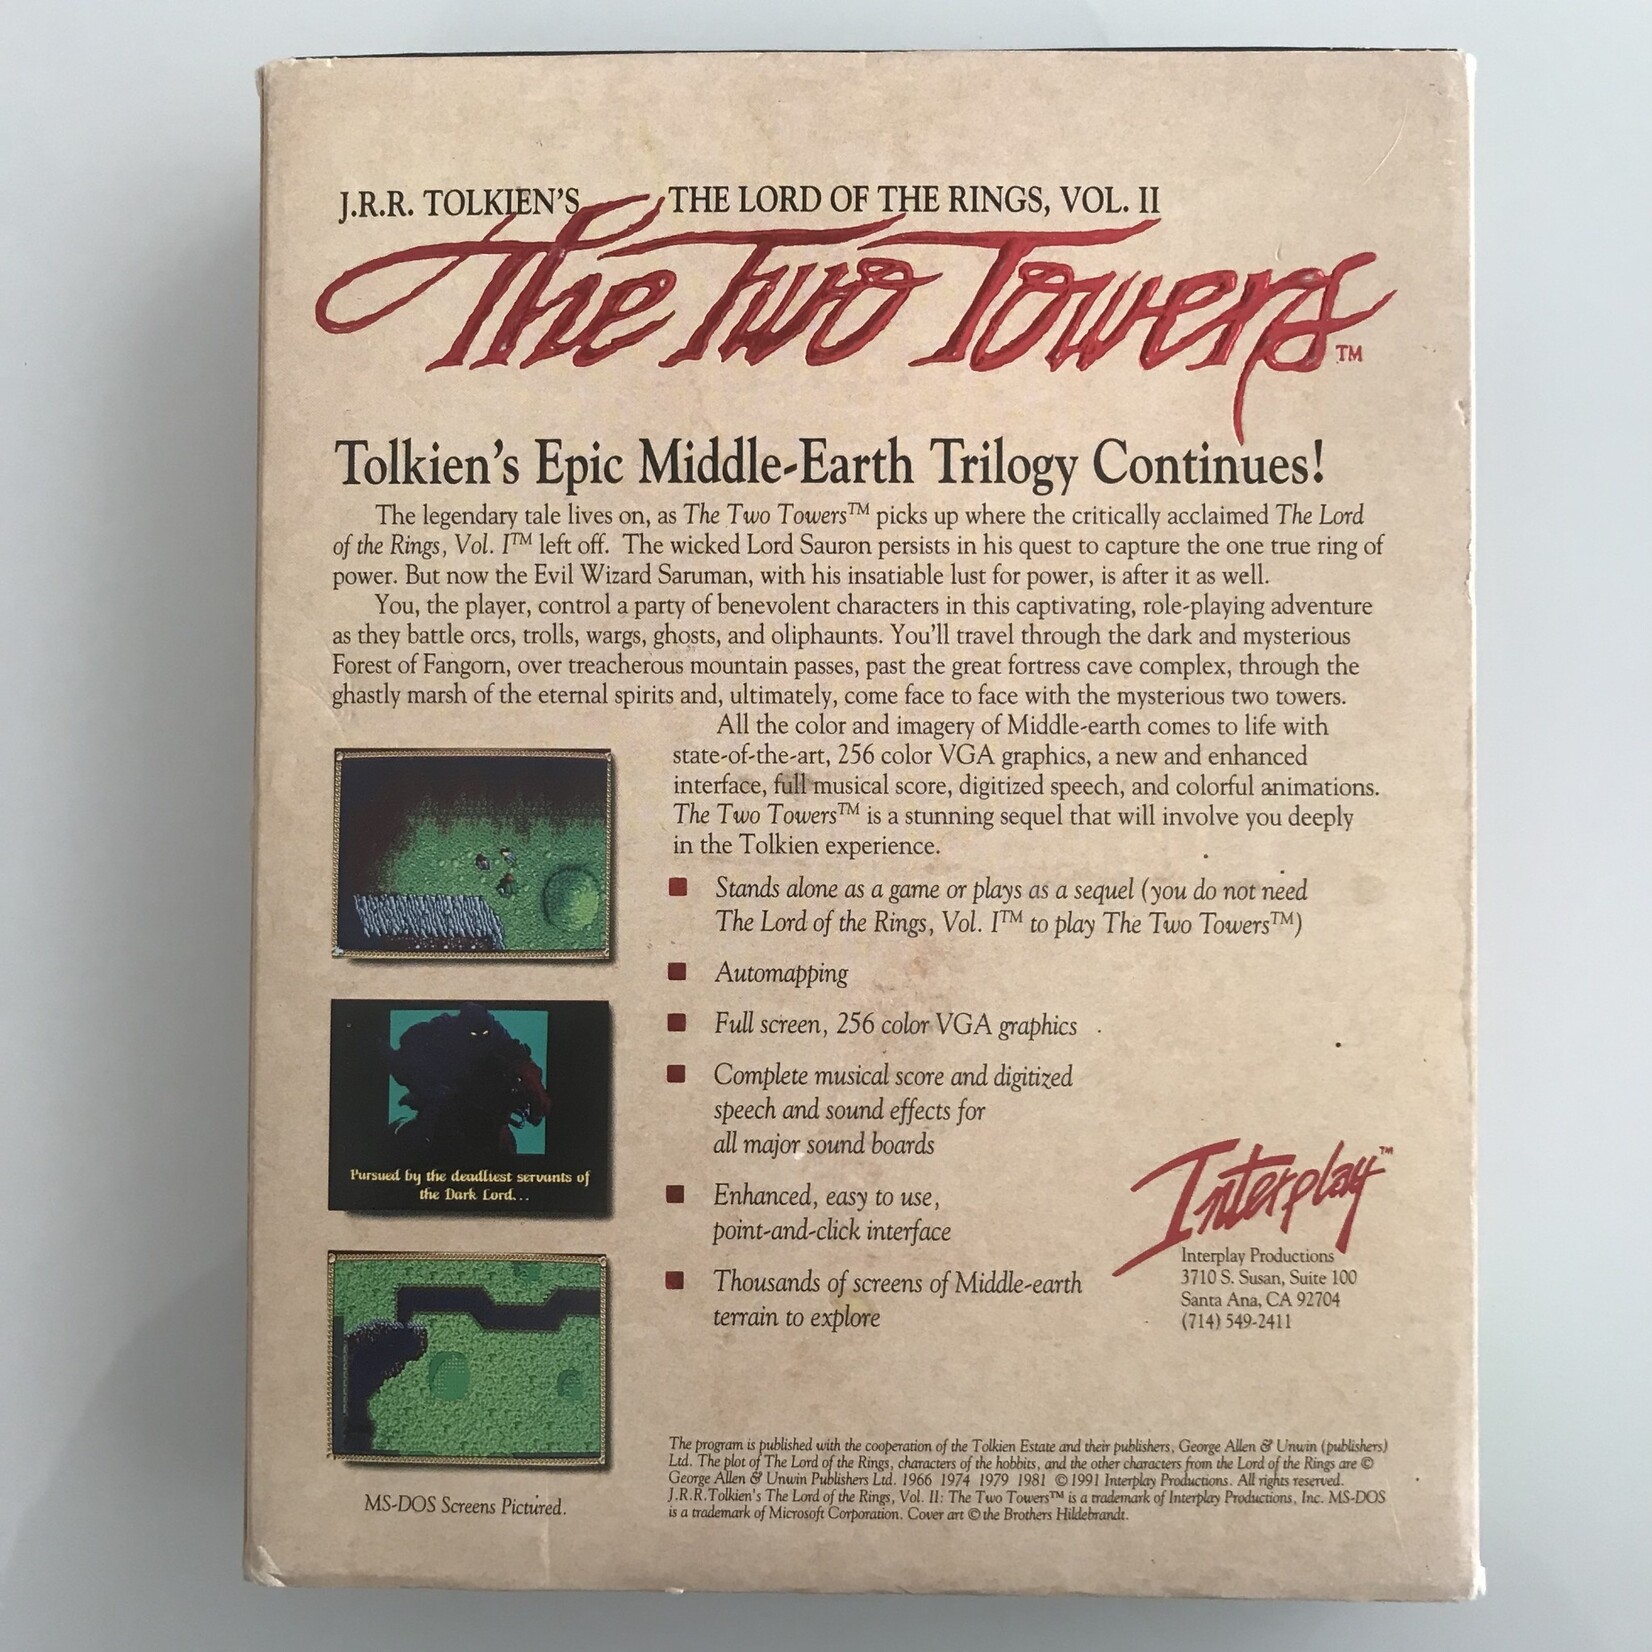 Lord Of The Rings: Vol. II The Two Towers - Vintage PC Game 1991 (USED)